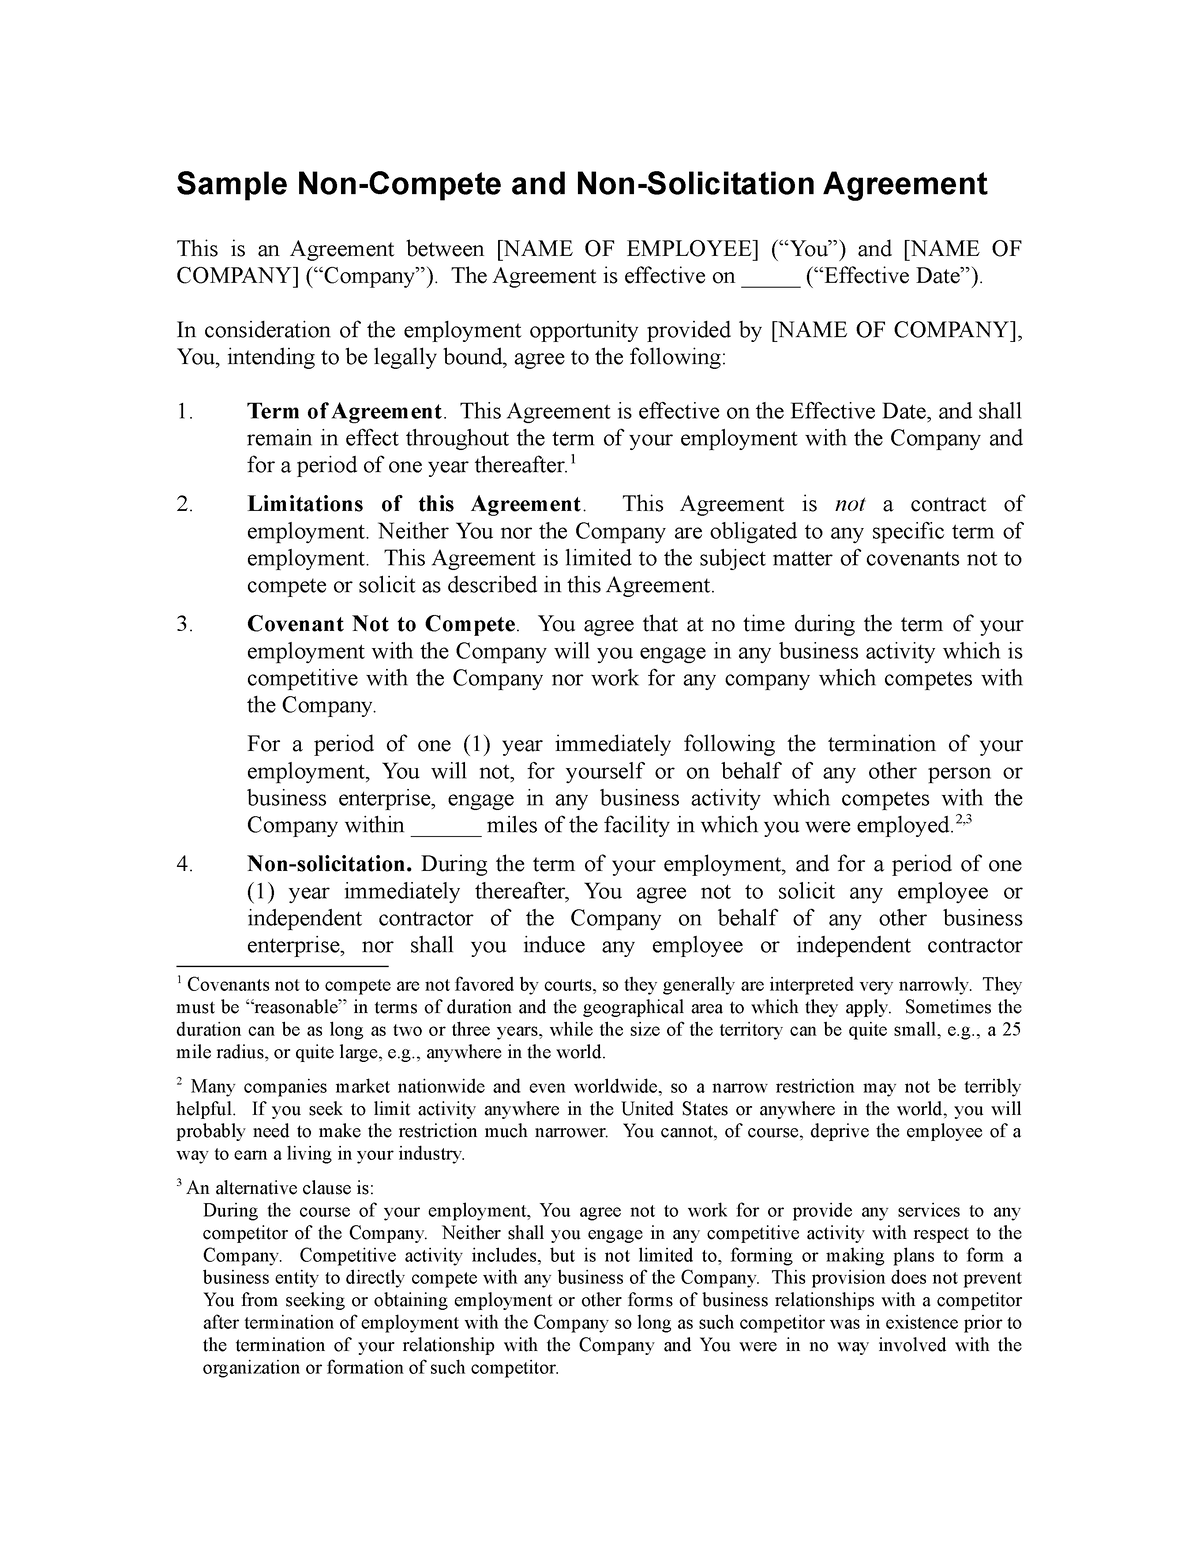 Sample and NonSolicitation Agreement The Agreement is